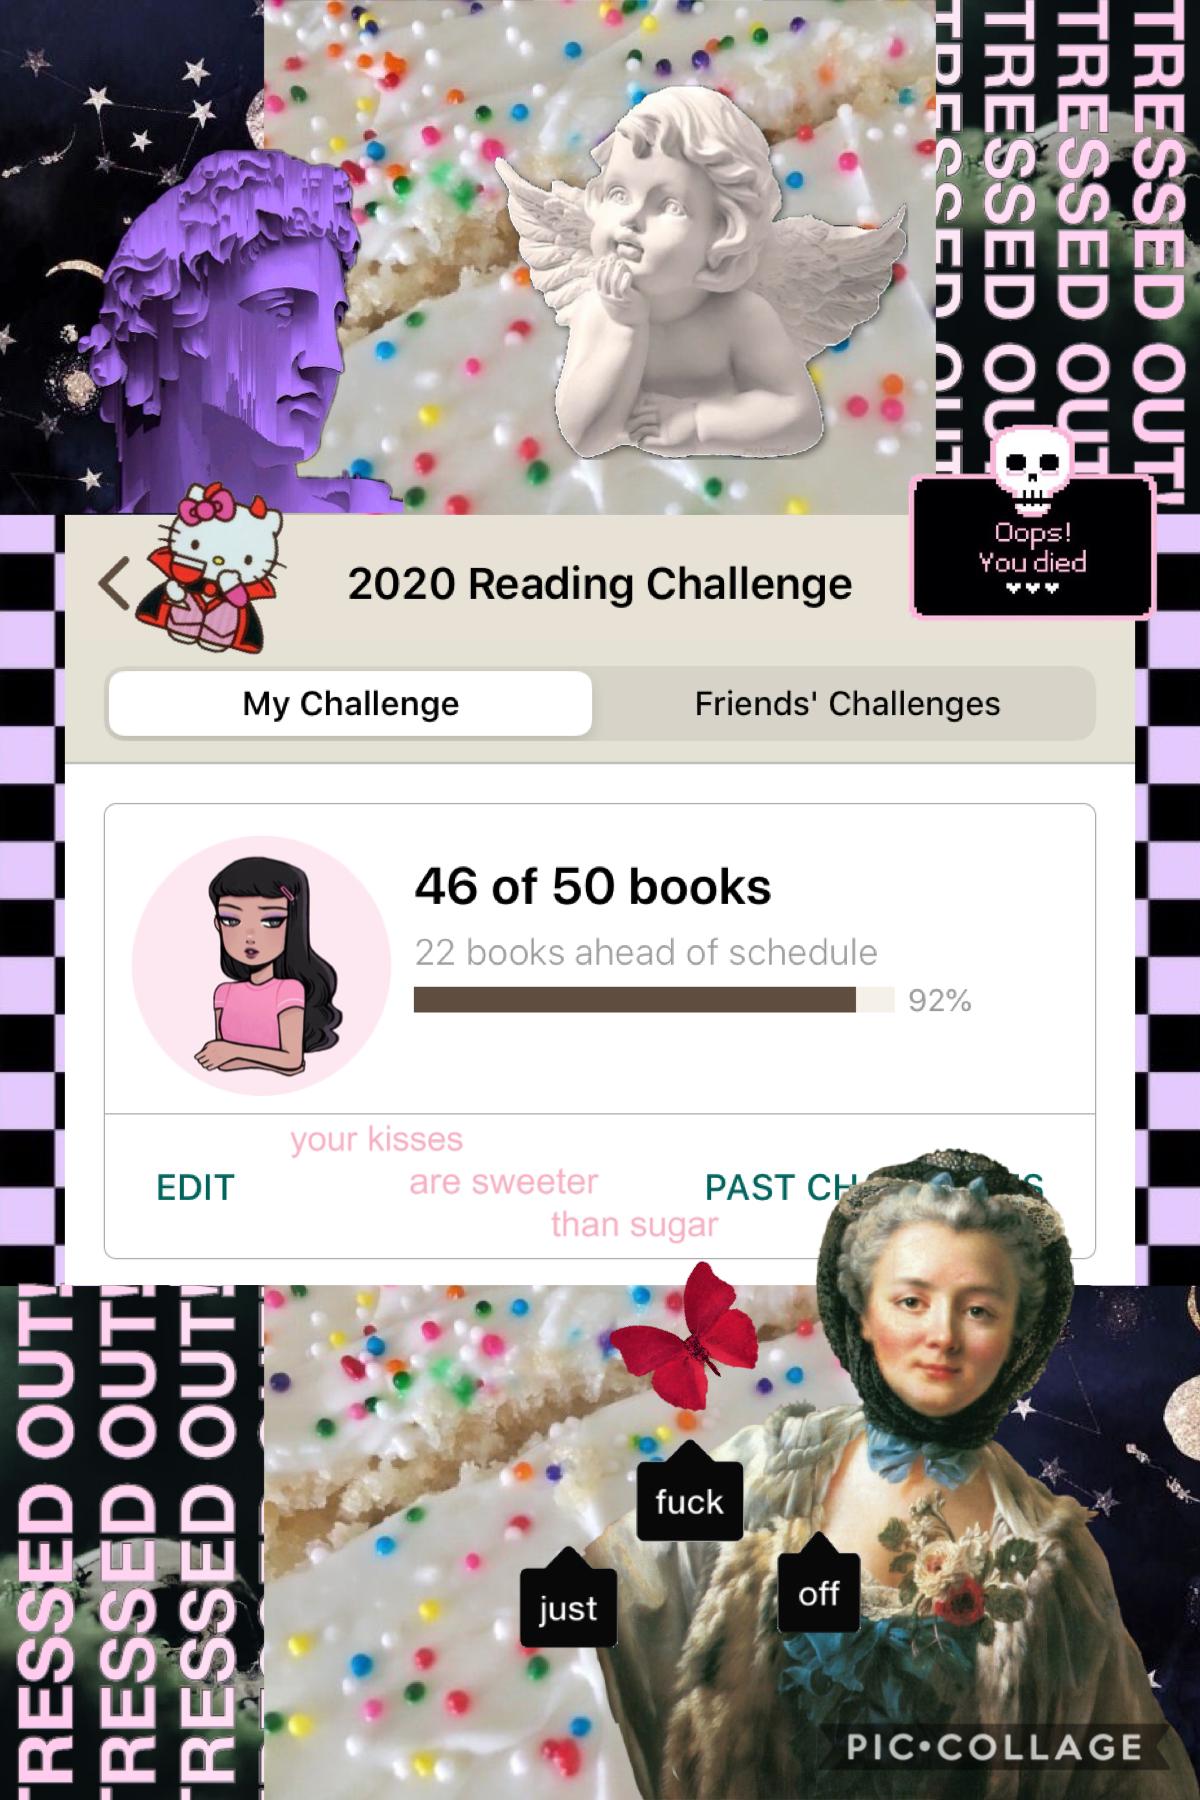 can y’all spot my 16 different personalities on this post 😂🤪🥰🐍🍓 just wanted to share that my goodreads challenge is THRIVING as i’ve taken to gobbling up books during quarantine 😂😍 how was your sLeep? did you dream? 👀💕